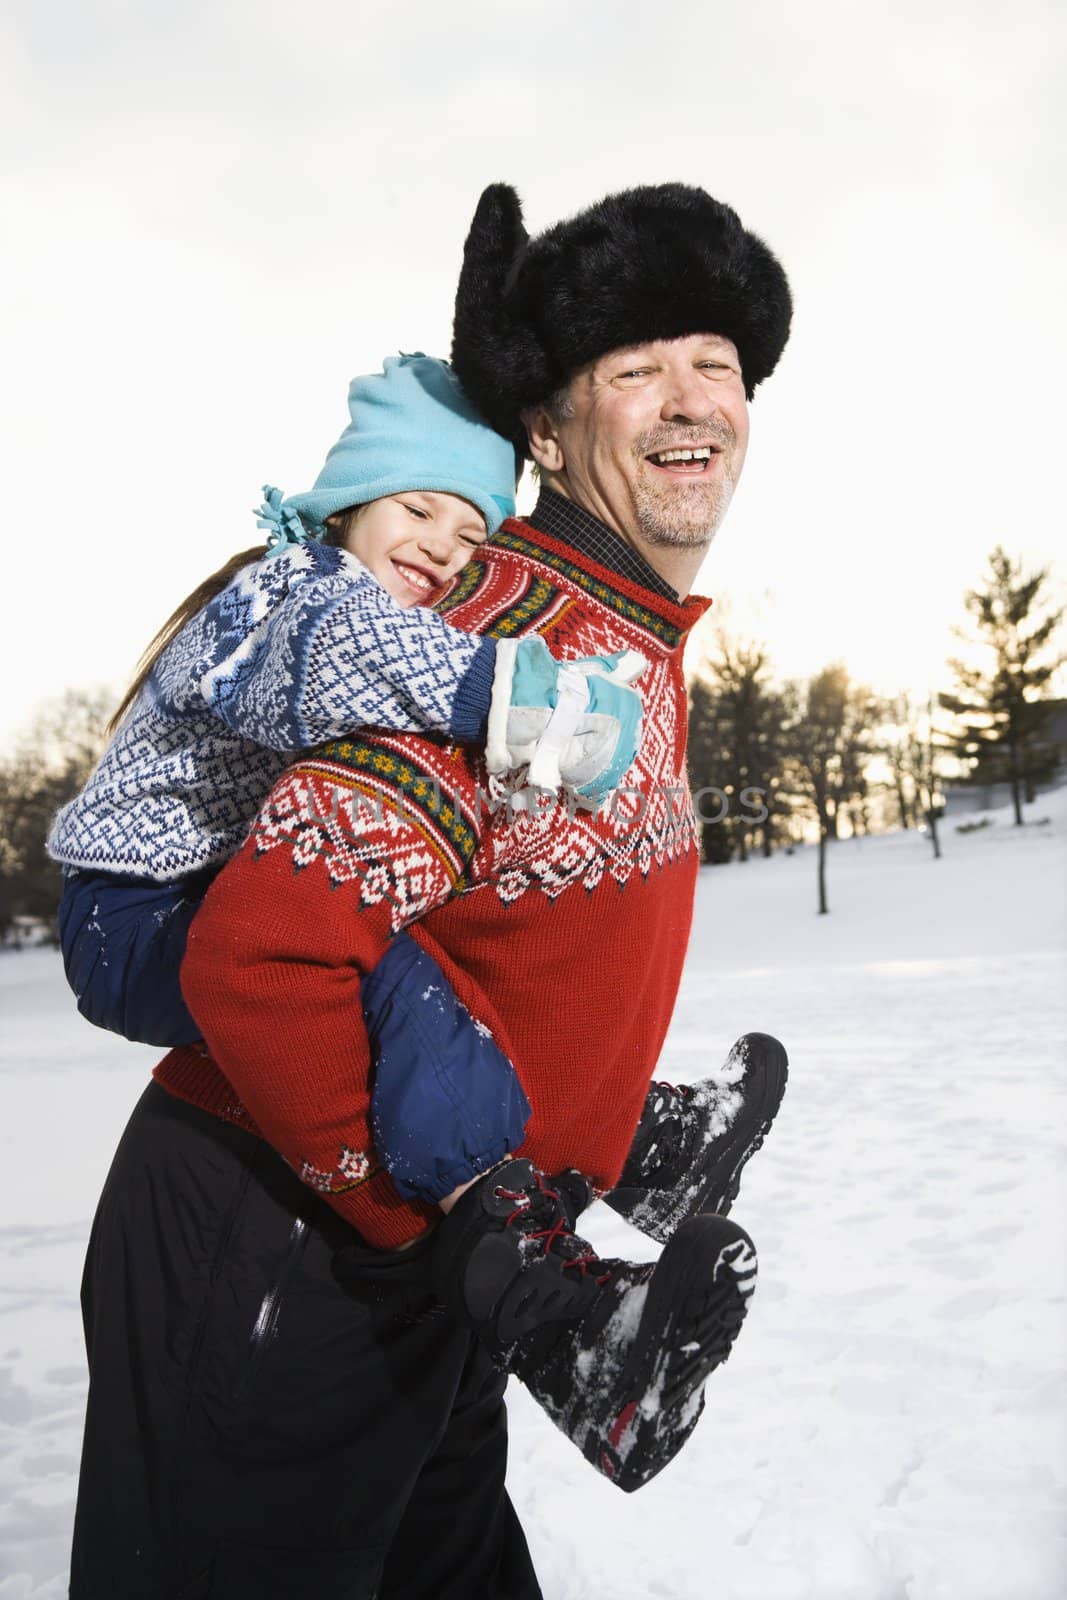 Caucasian middle aged man holding Caucasian litte girl piggyback style smiling and looking at viewer smiling.